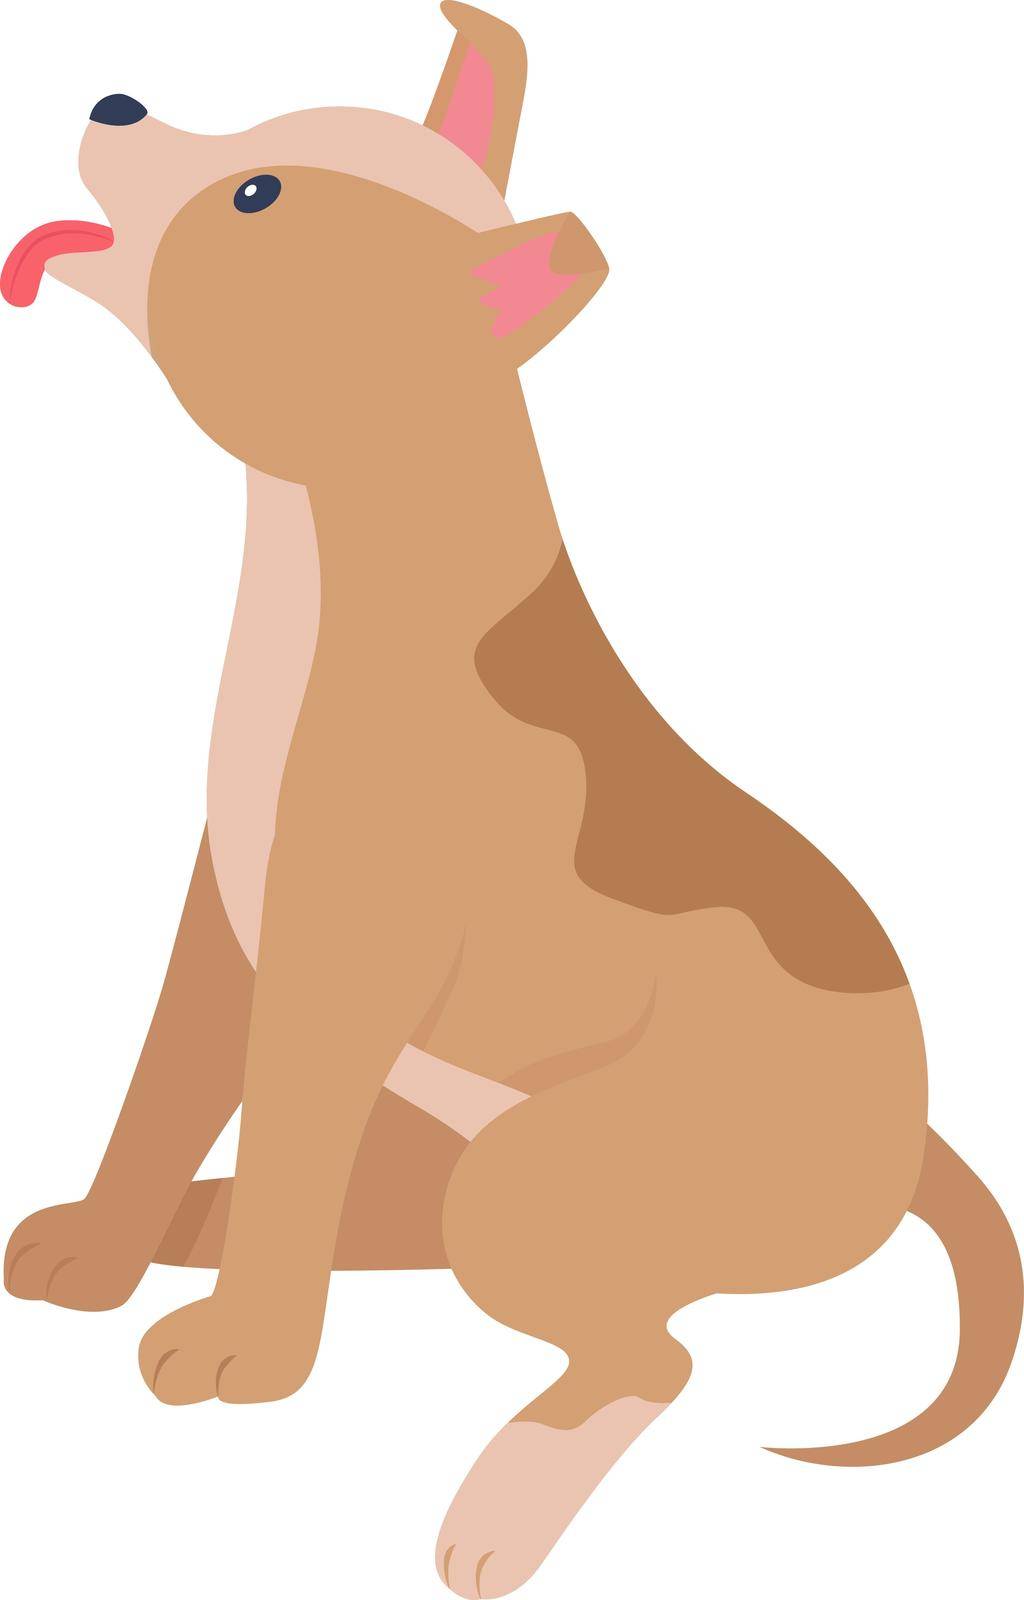 Adopt puppy from abroad semi flat color vector character. Full body animal on white. Visiting animal shelter. Dog rehoming isolated modern cartoon style illustration for graphic design and animation